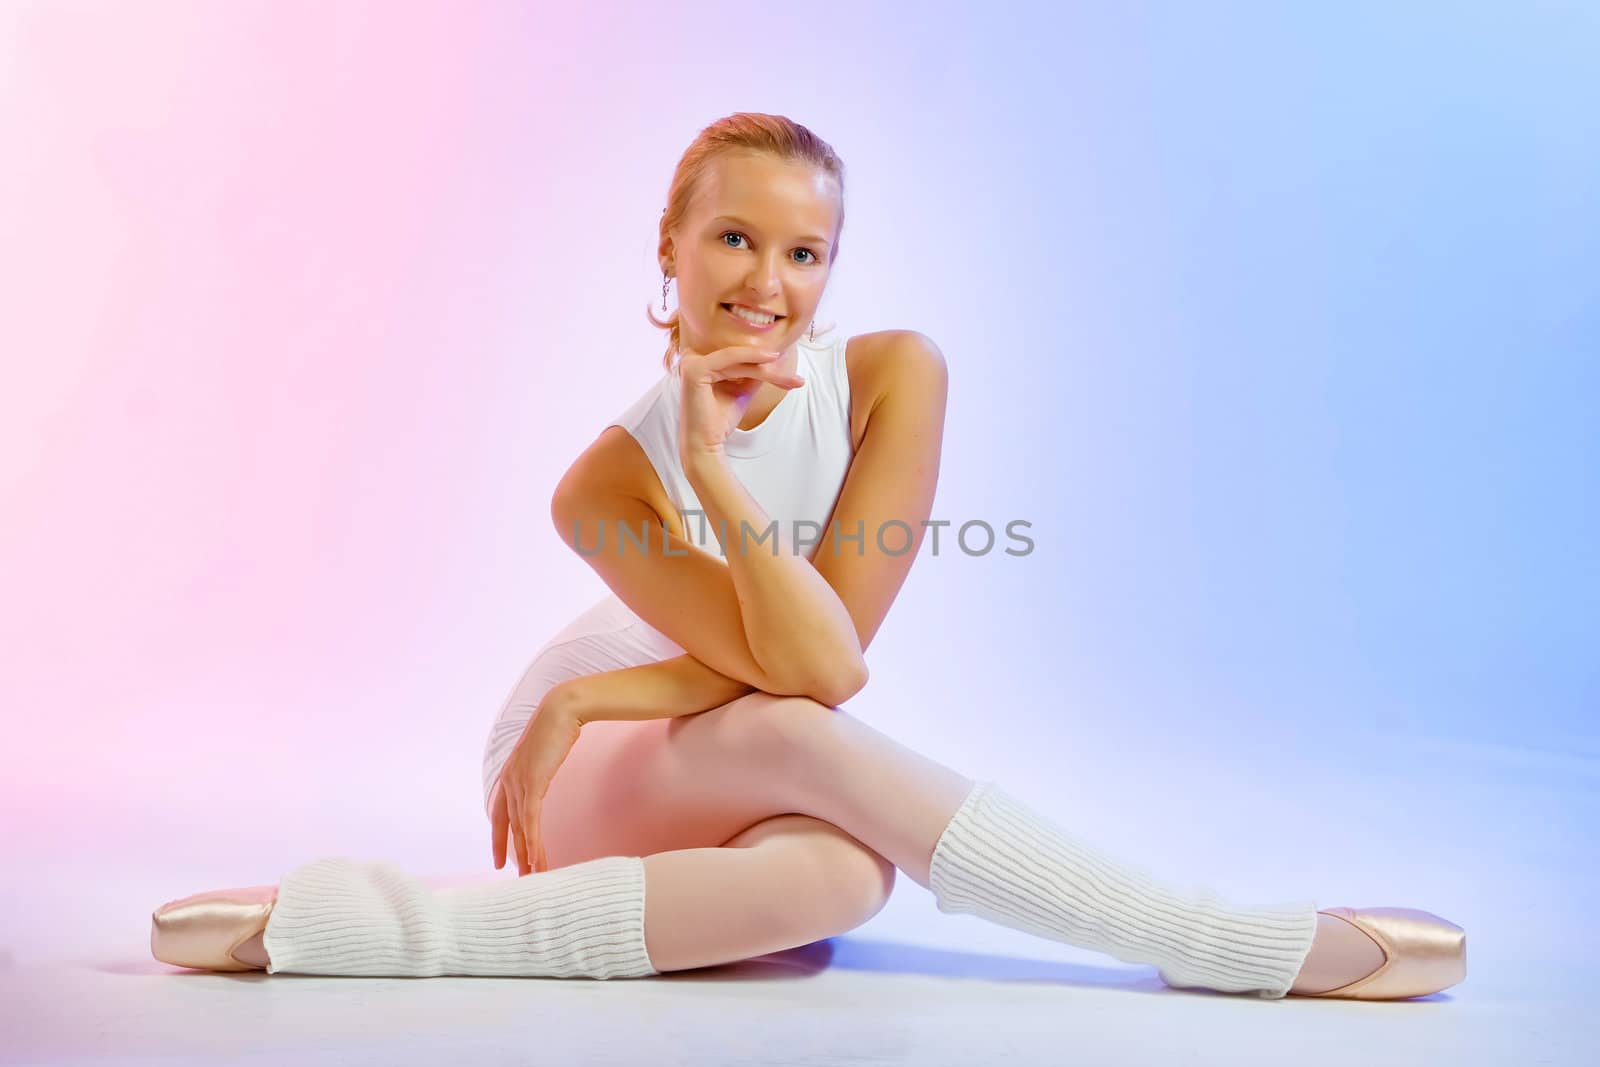 The charming young blonde during employment by fitness